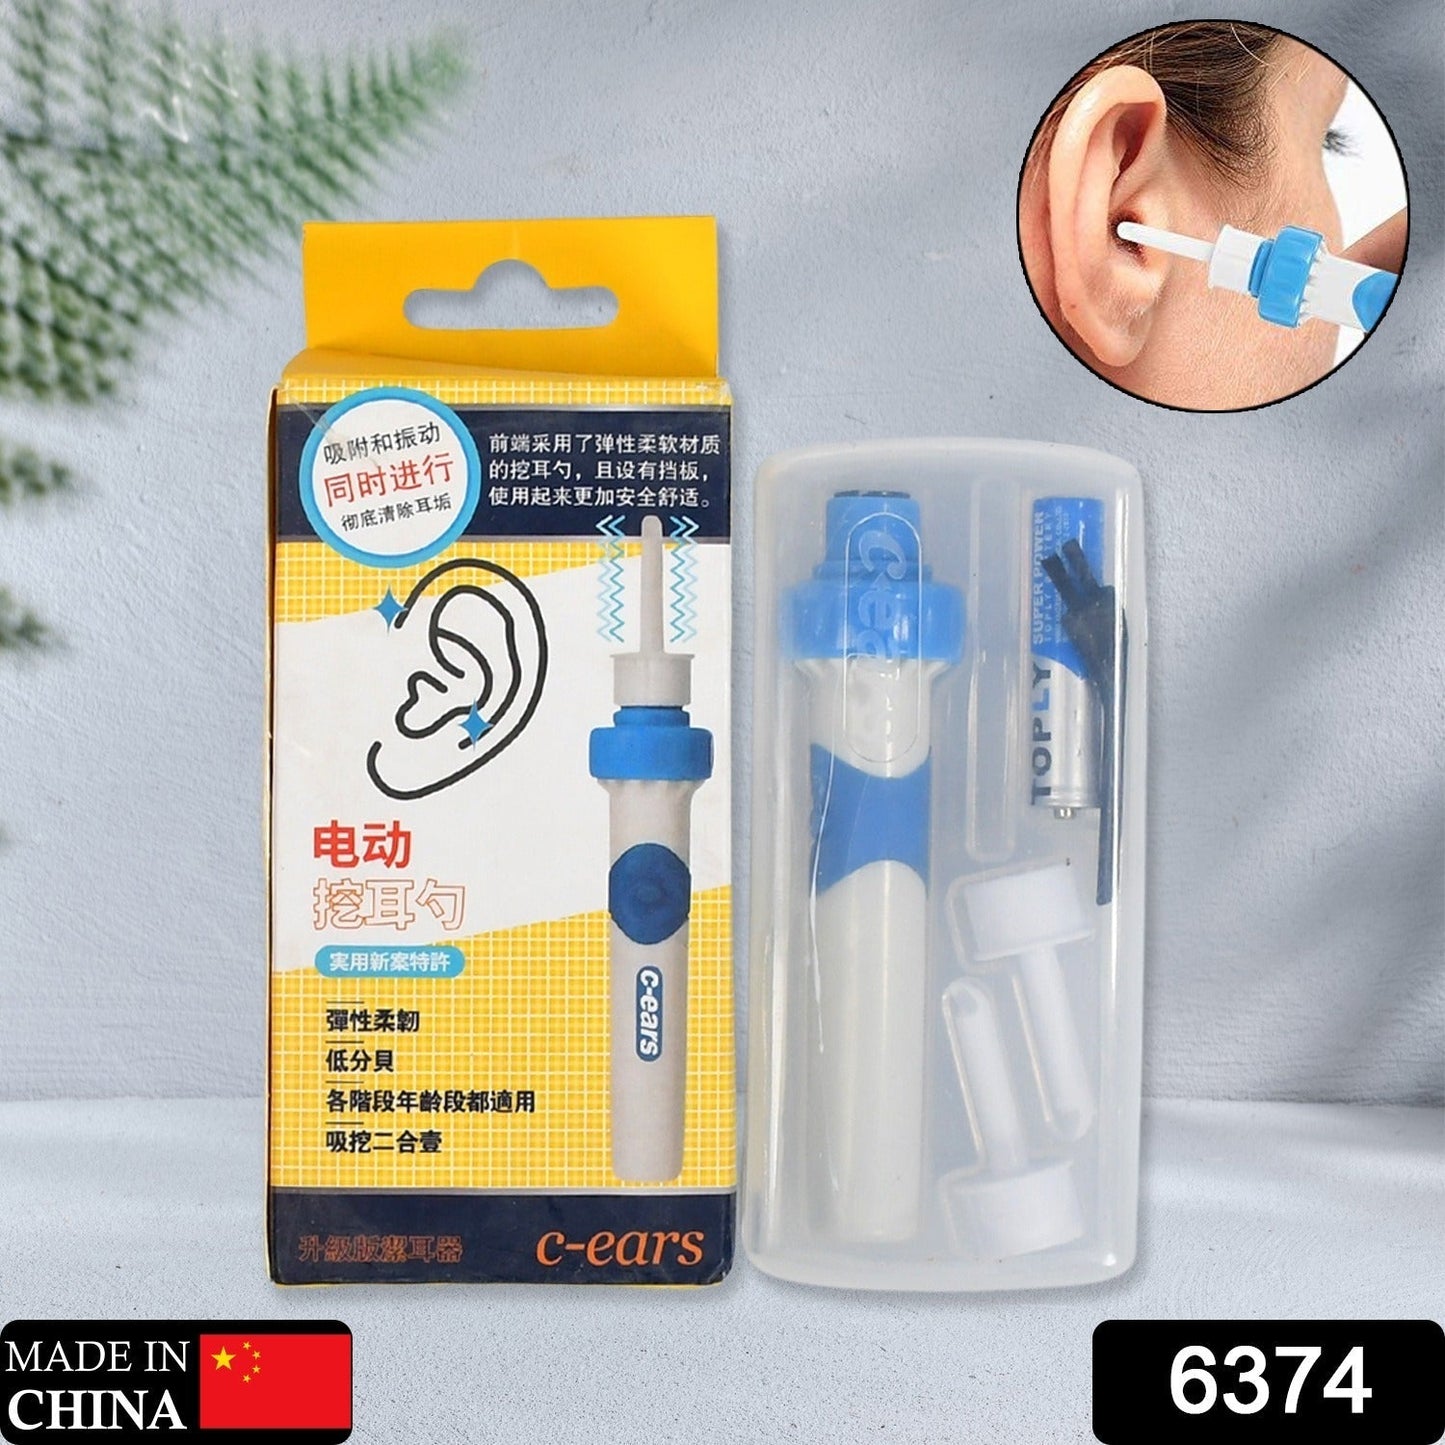 6374 Ear Suction Device, Portable Comfortable Efficient Automatic Electric Vacuum Soft Ear Pick Ear Cleaner Easy Earwax Remover Soft Prevent Ear-Pick Clean Tools Set for Adults Kids JK Trends